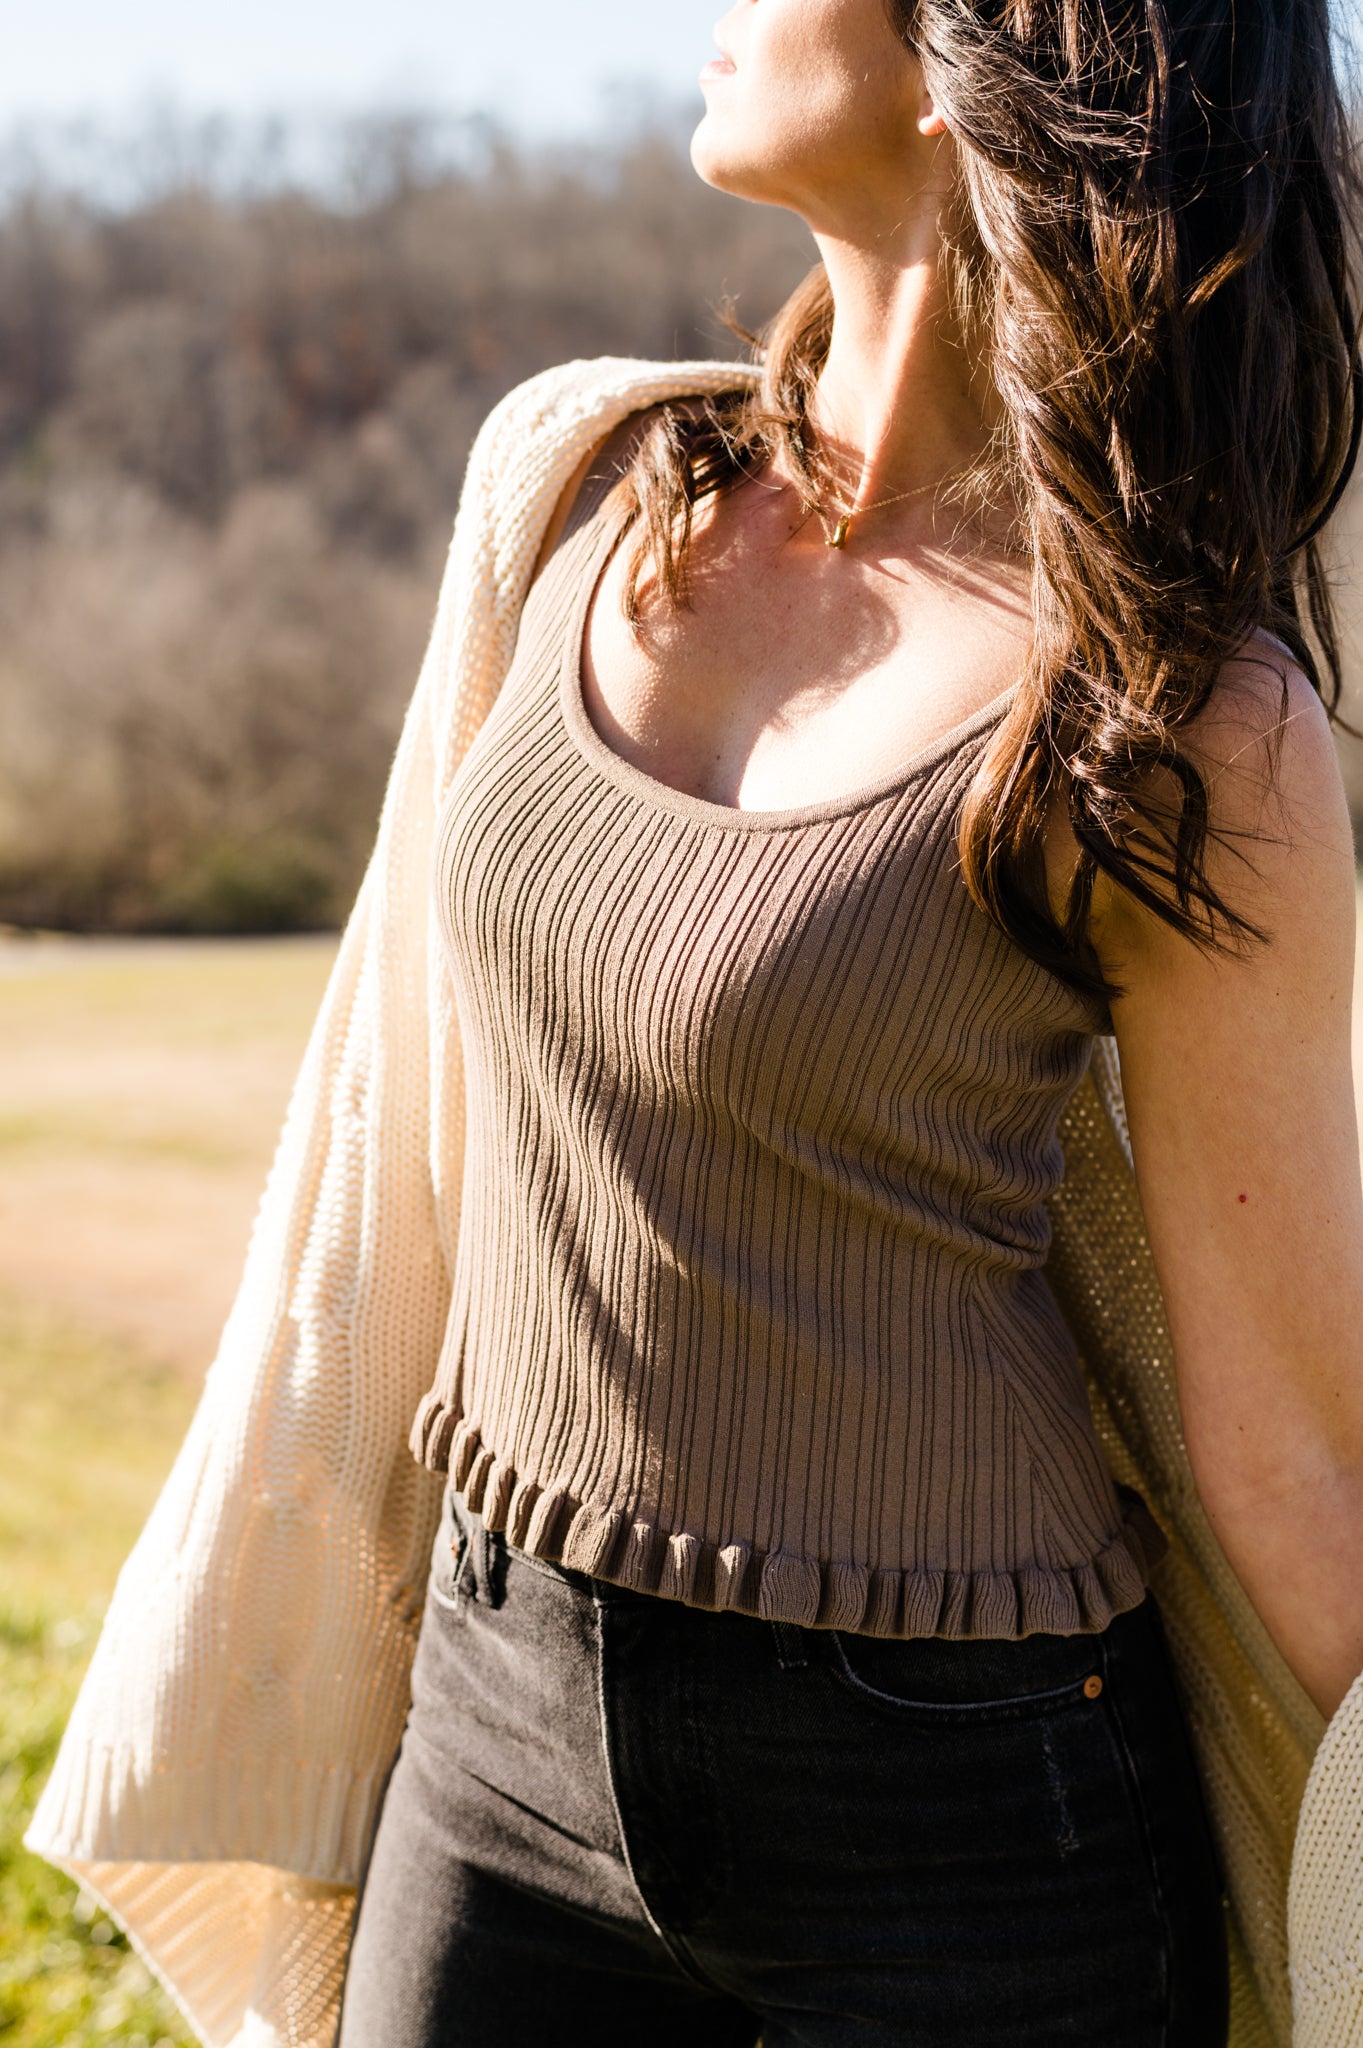 Woman in beige top and black jeans, with sunlit nature backdrop.